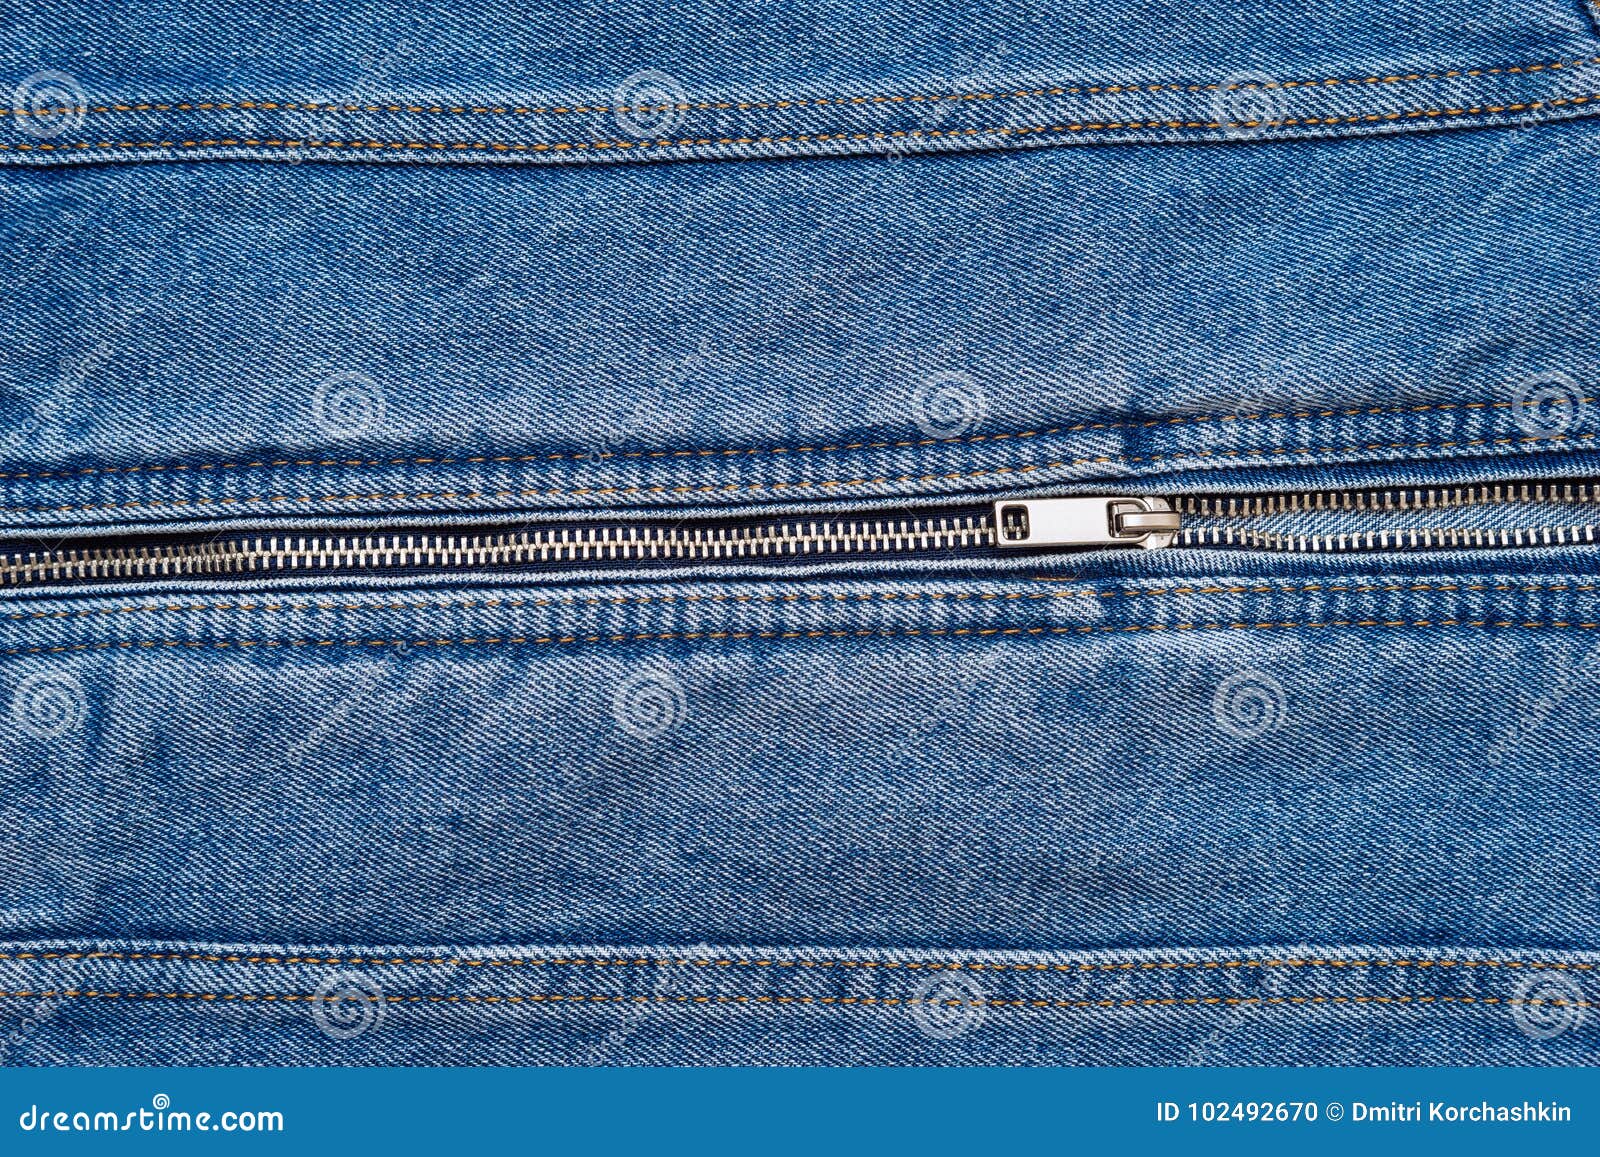 Jeans with a zipper stock photo. Image of close, detail - 102492670